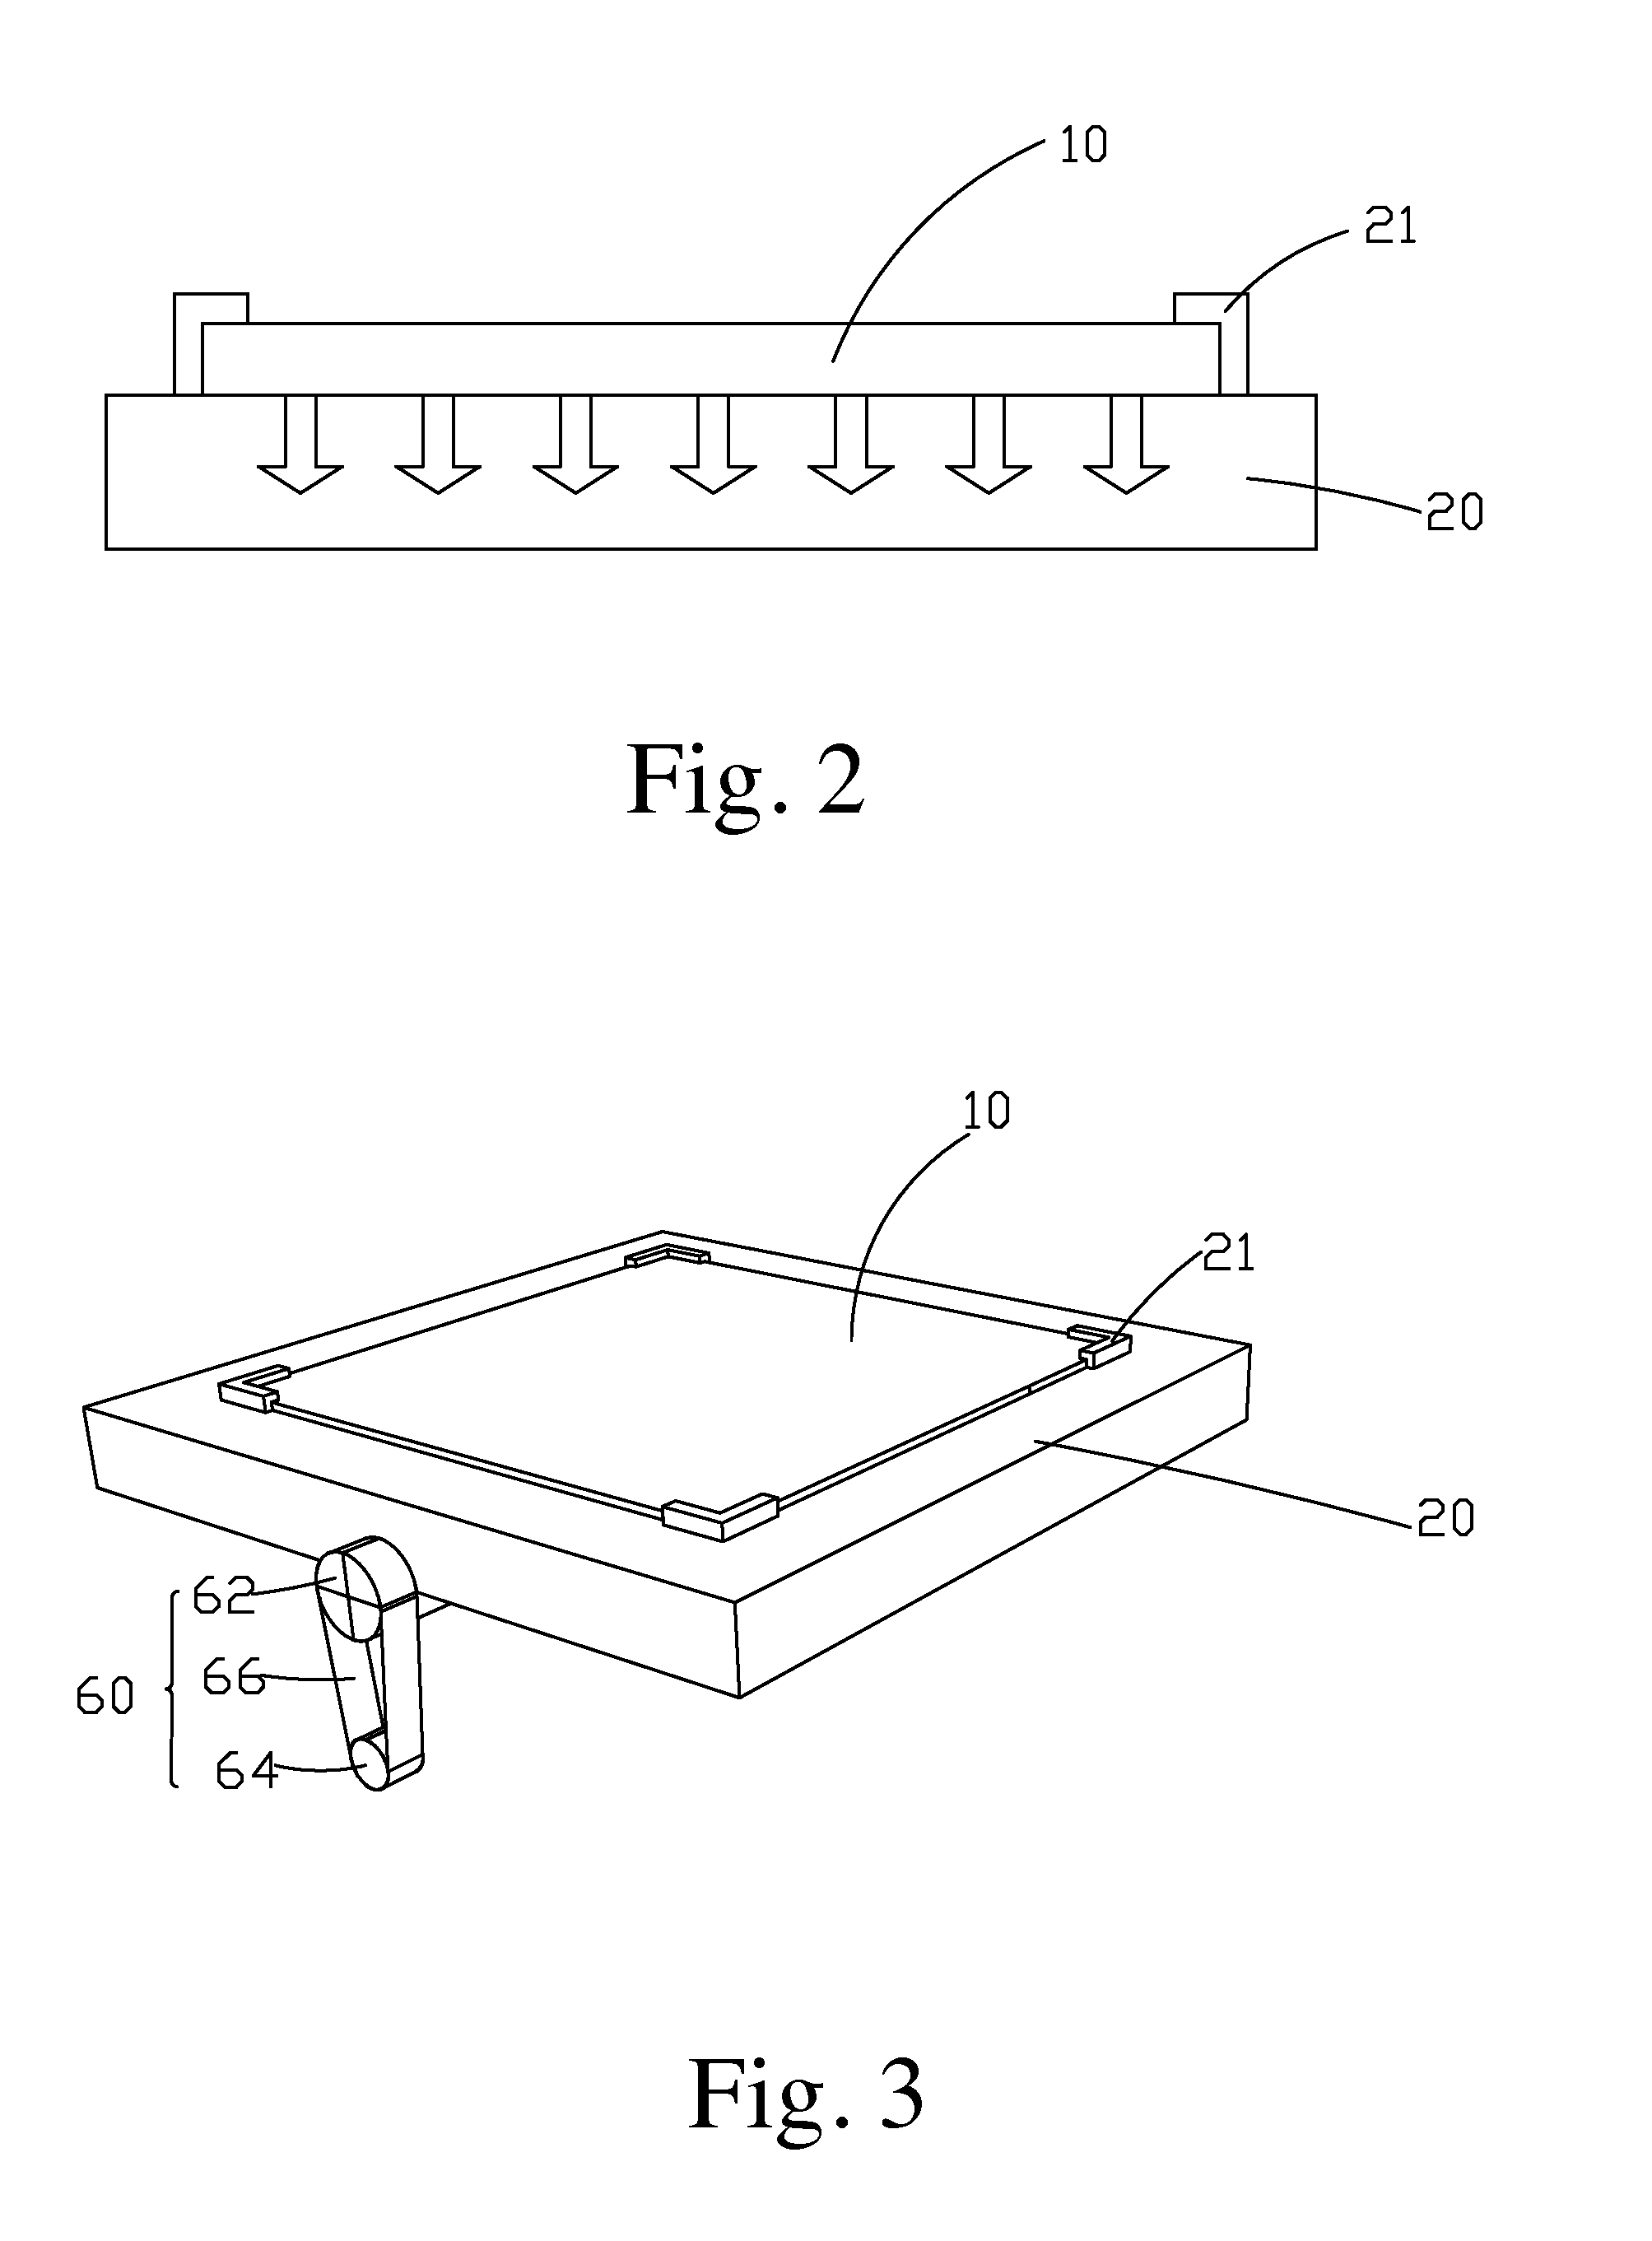 Method for cutting single sheet of glass substrate